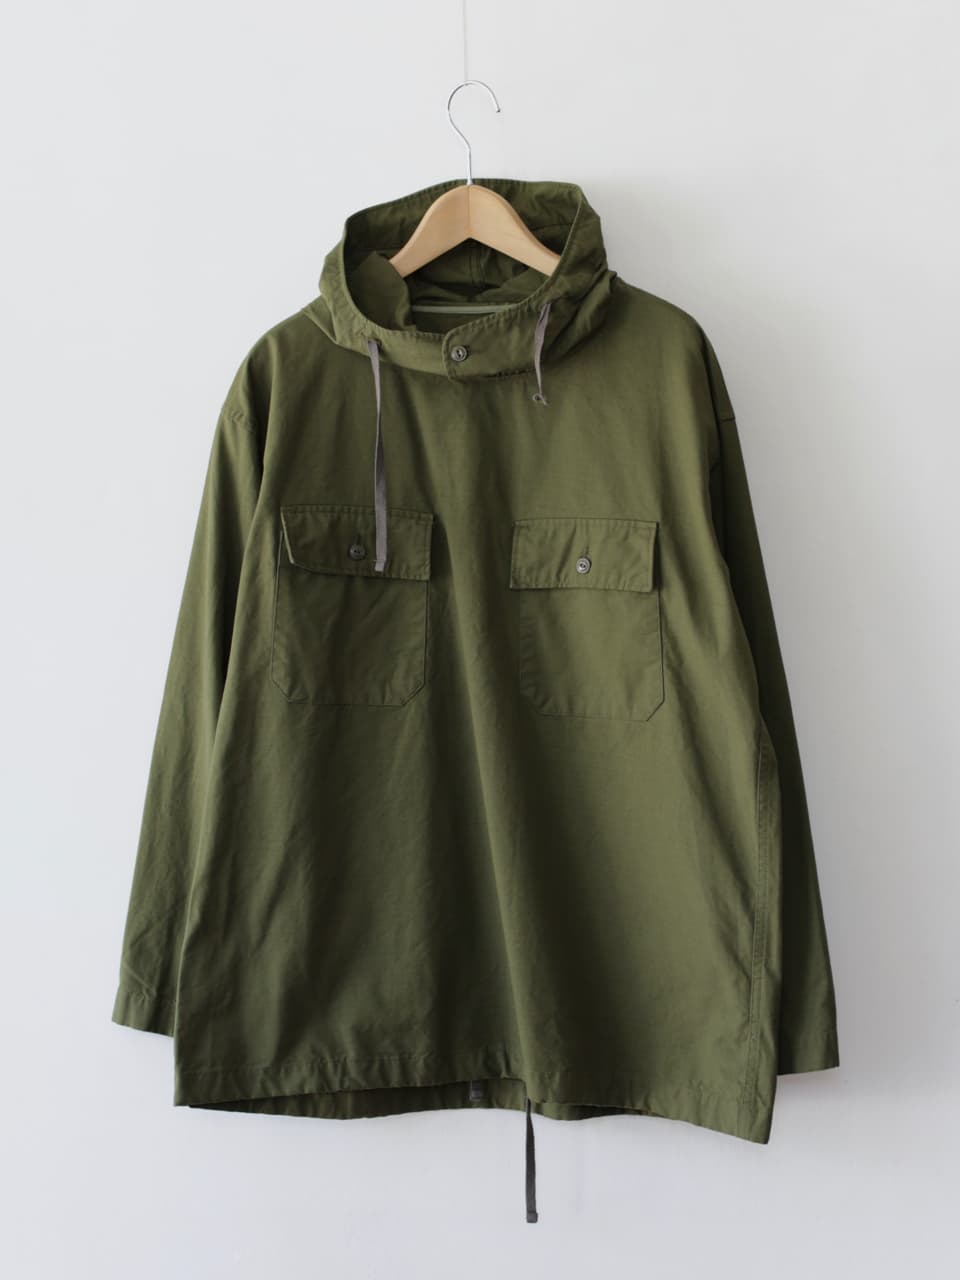 Engineered Garments Cagoule Shirt価格変更させて頂きました